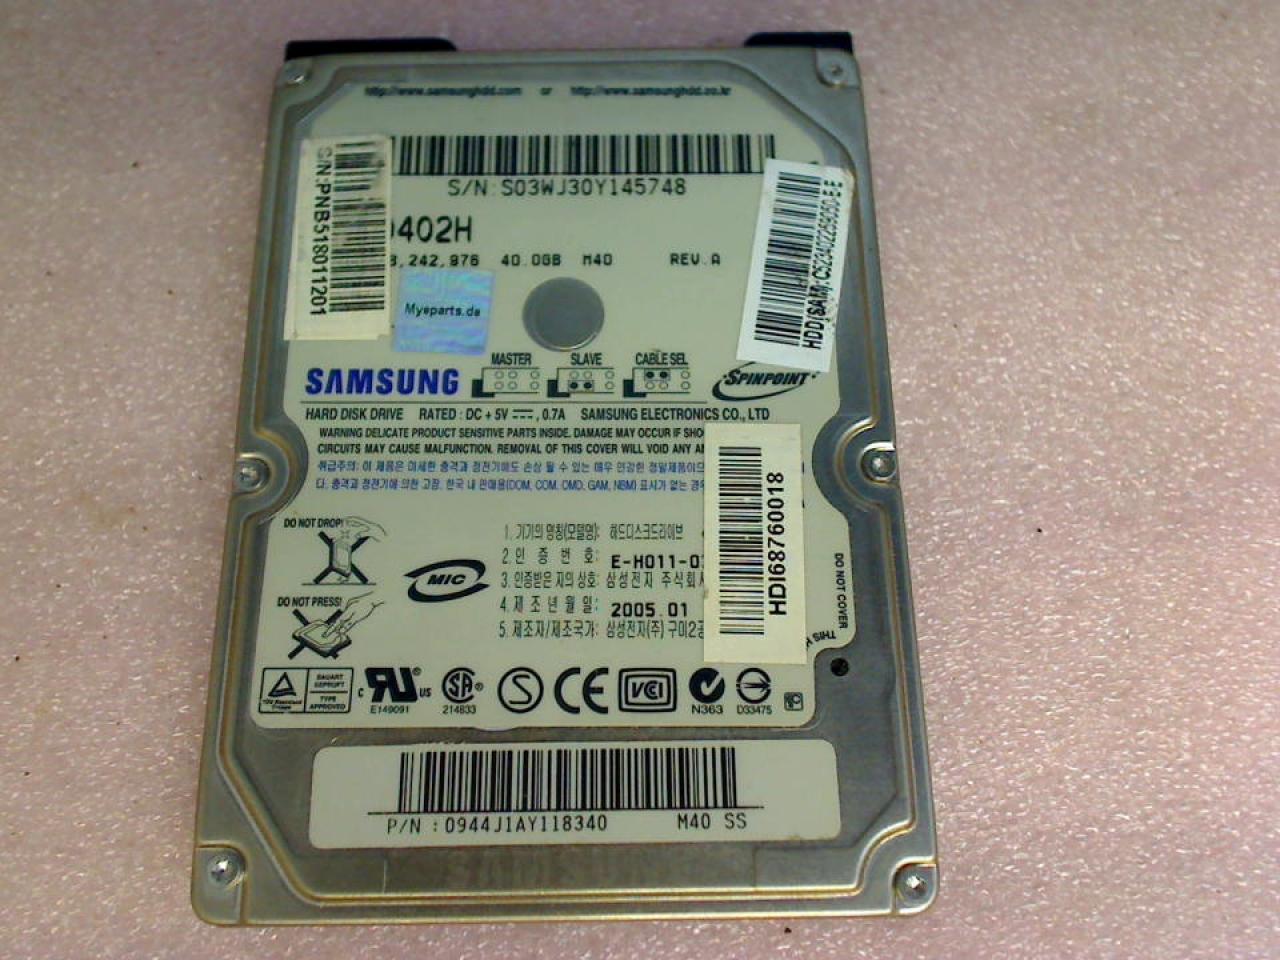 HDD hard drive 2.5" 40GB Samsung MP0402H (AT) IDE Dell D800 PP02X (2)